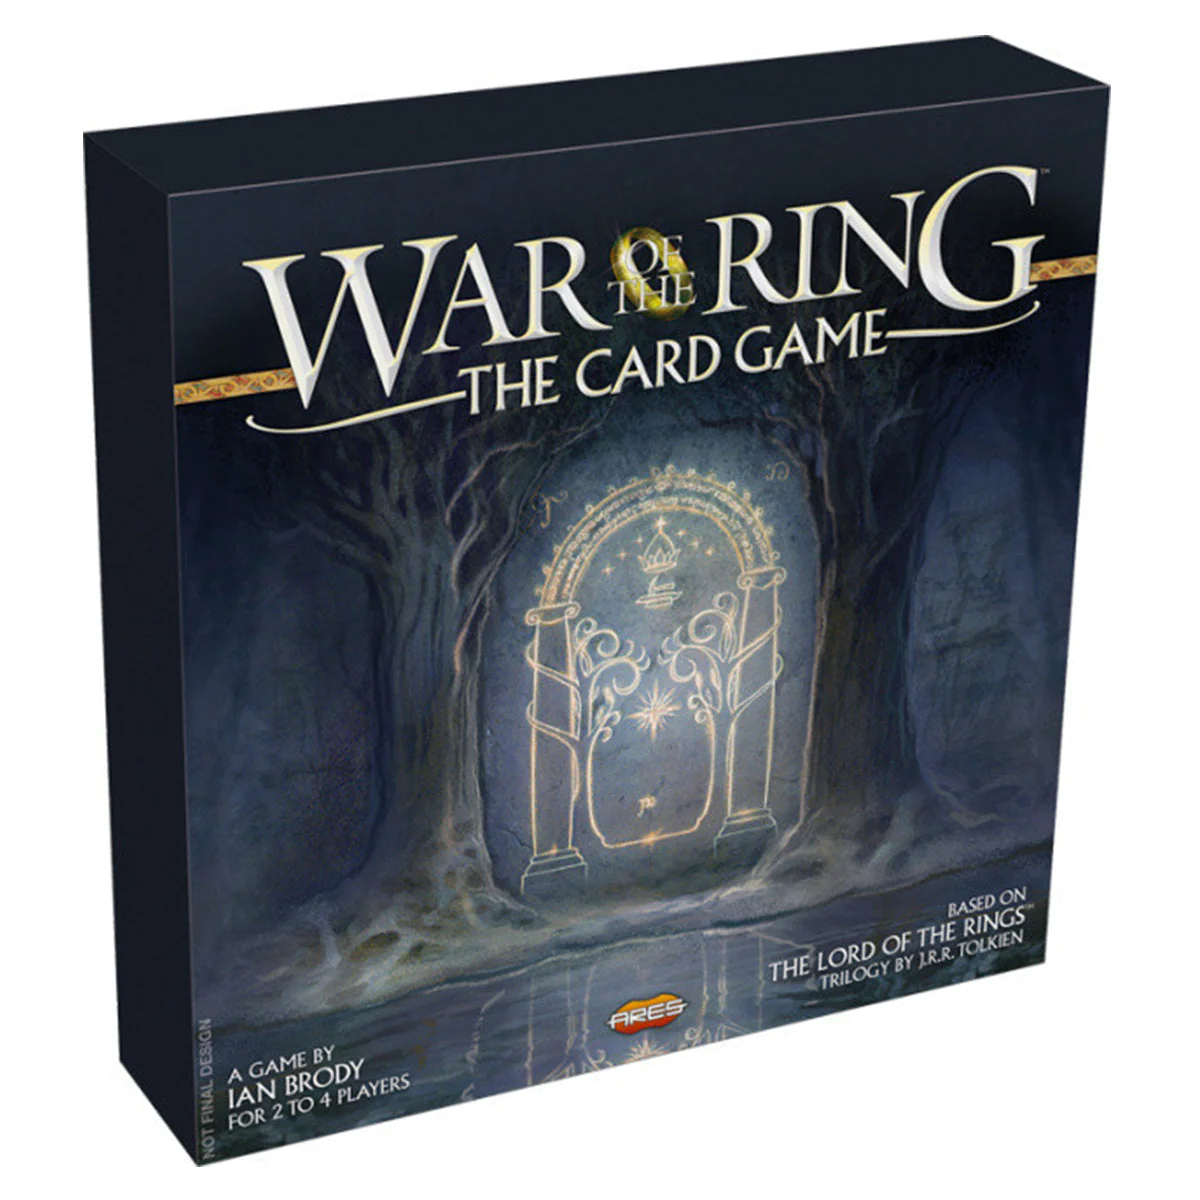 War of the Ring The Card Game